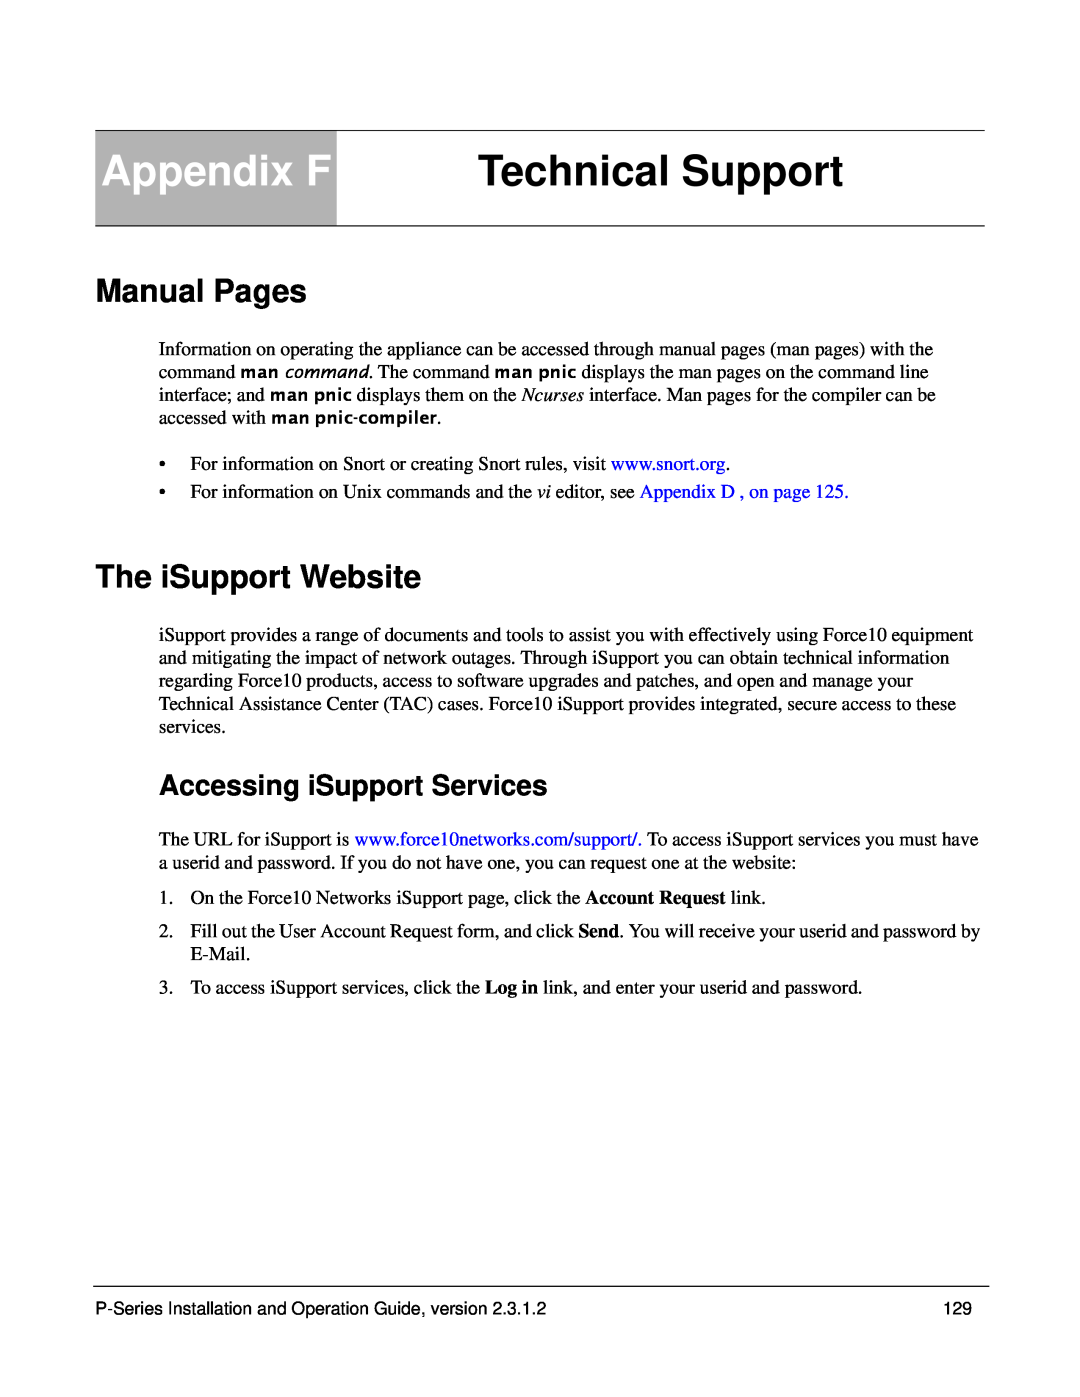 Force10 Networks 100-00055-01 manual Appendix F, Technical Support, Manual Pages, The iSupport Website 